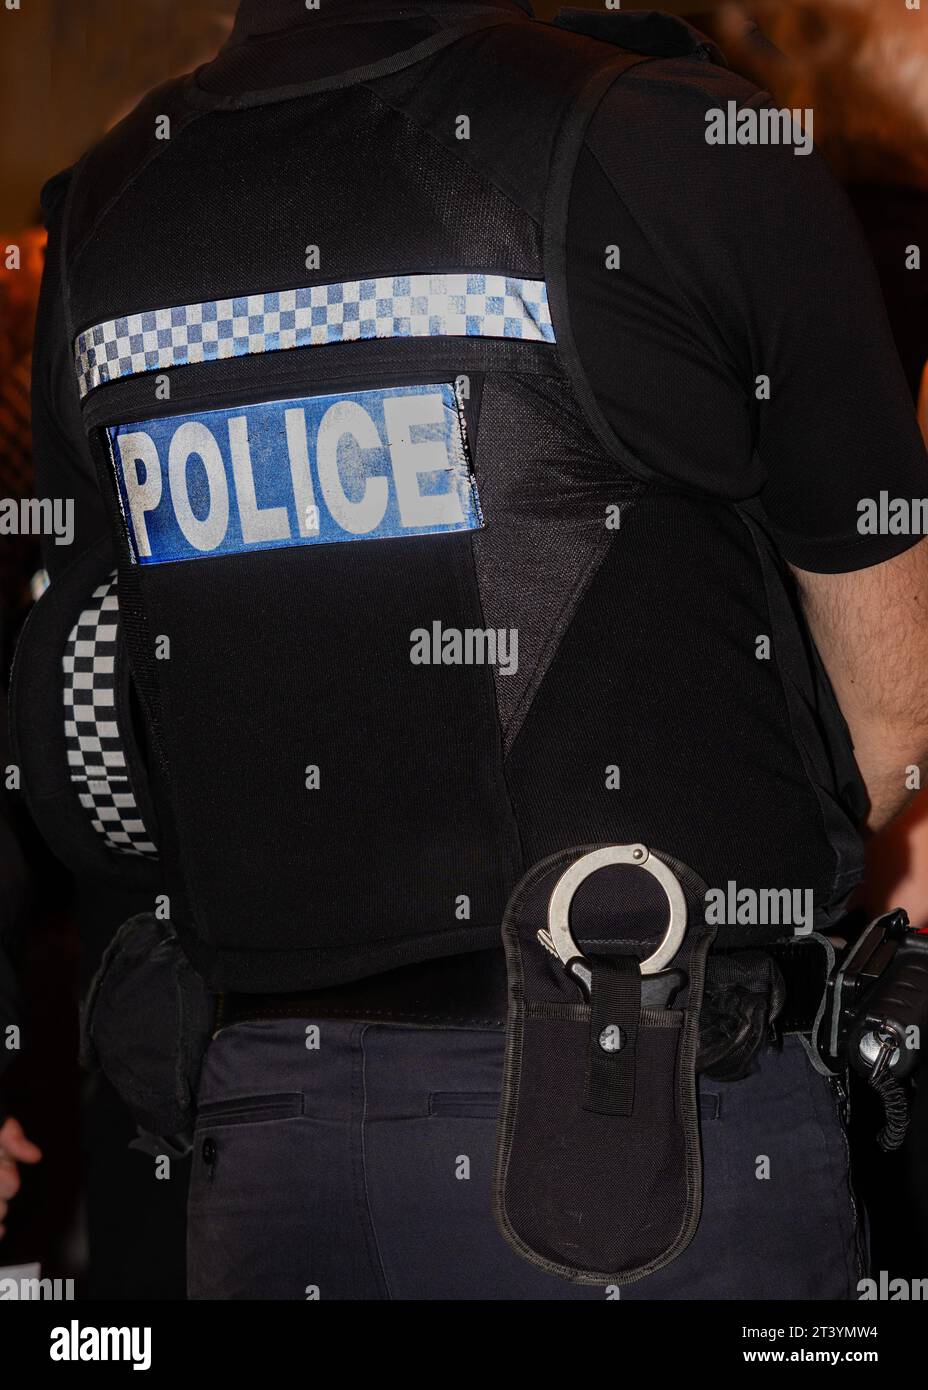 The word “Police” on the back of a policeman’s uniform jacket, handcuffs also in the picture Stock Photo